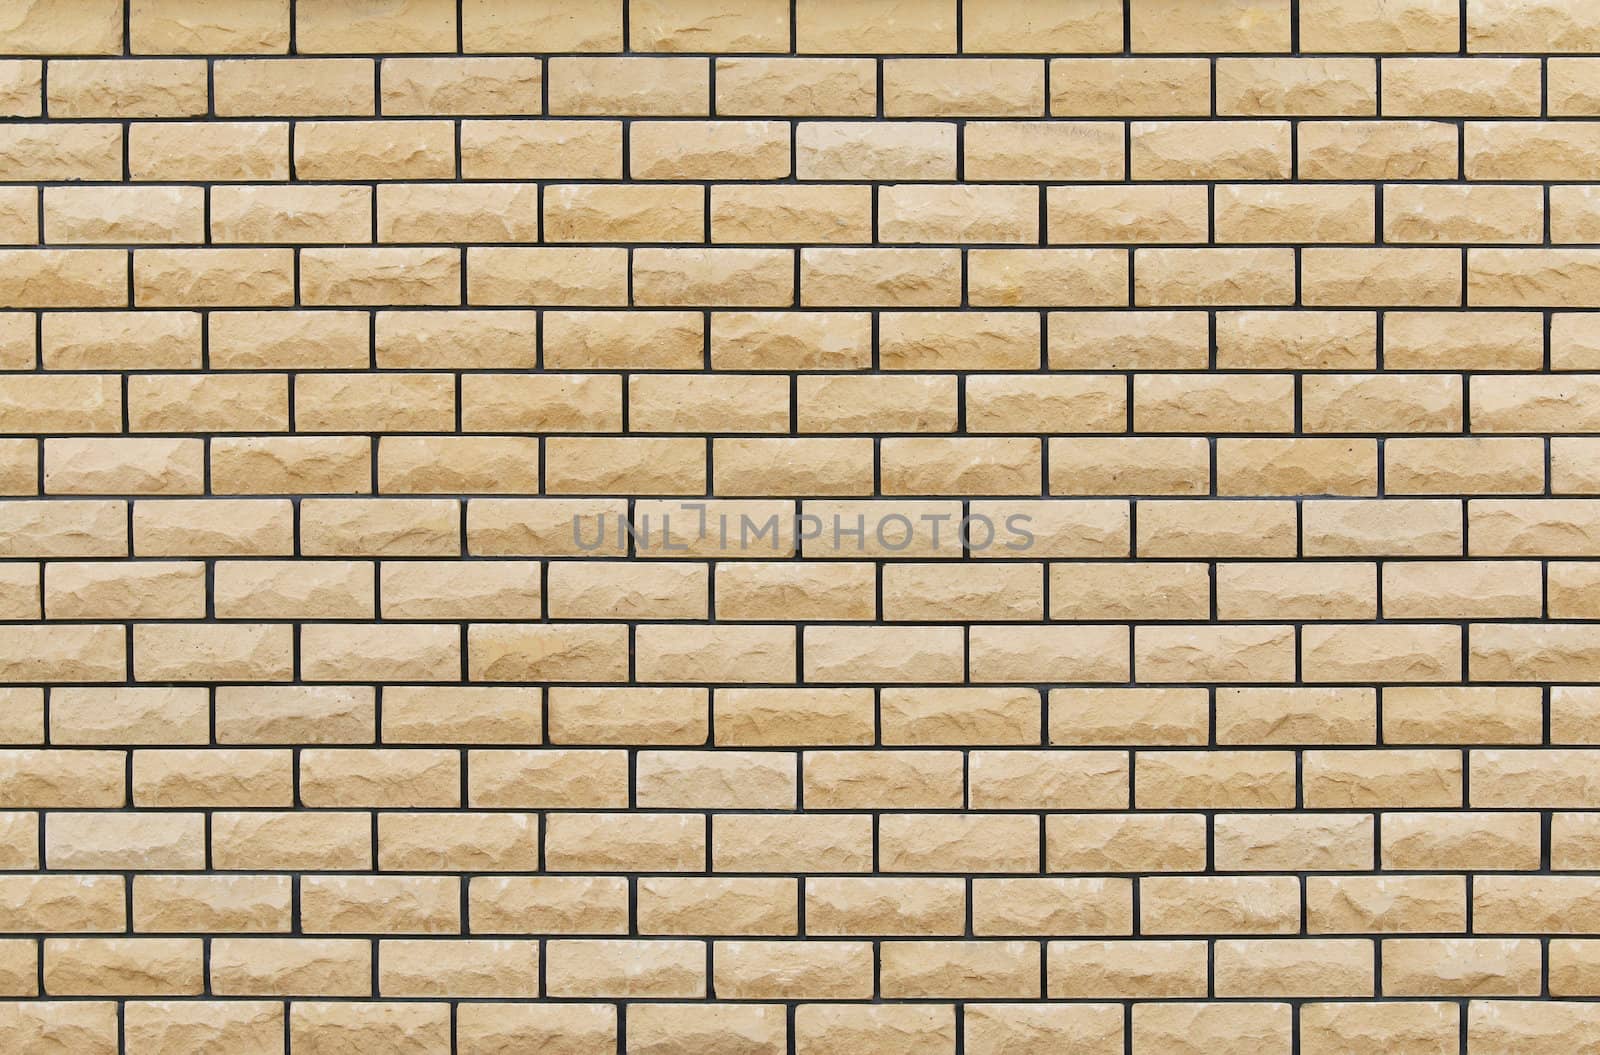 New and Clean yellow Brick Wall 